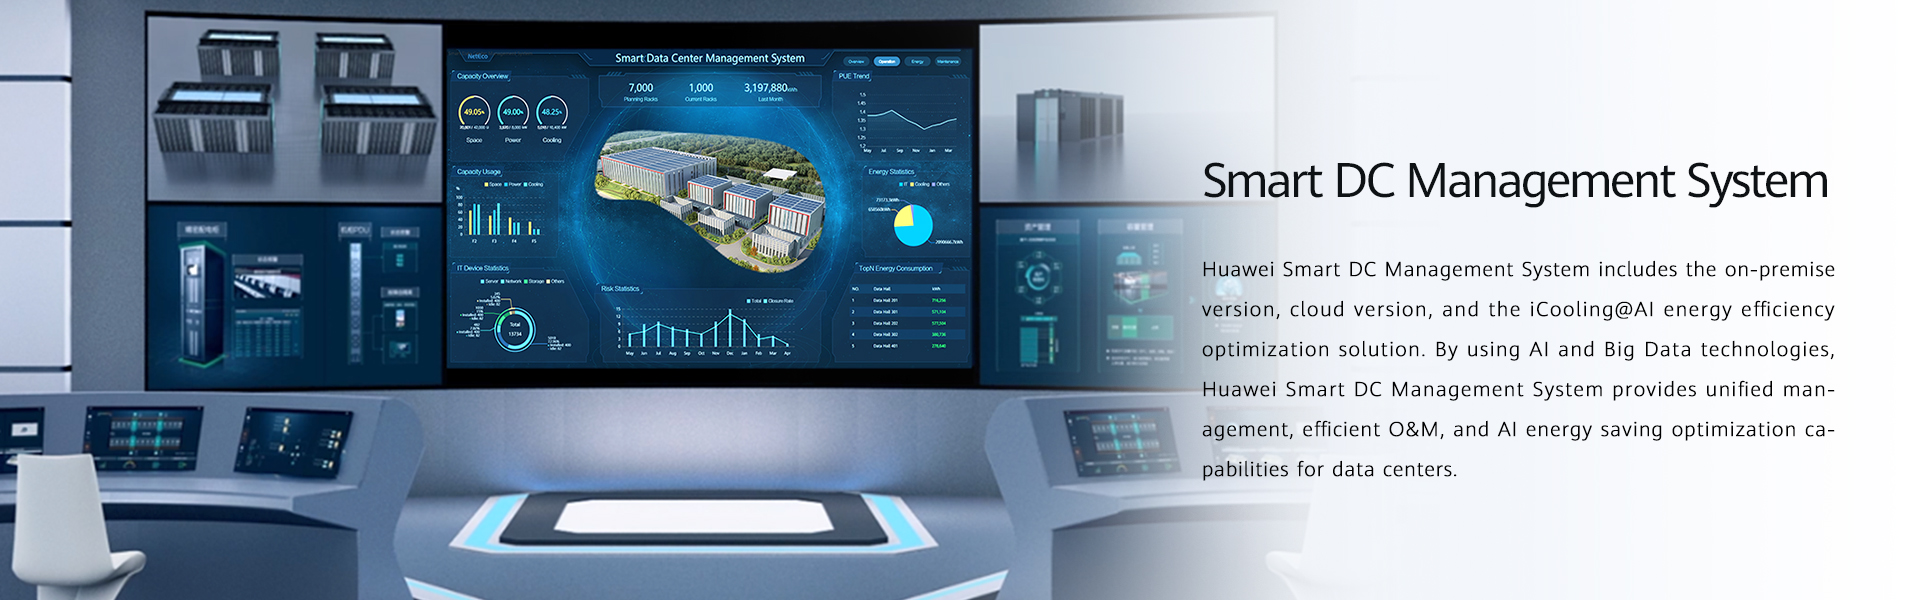 Huawei Data Center Management System Solution